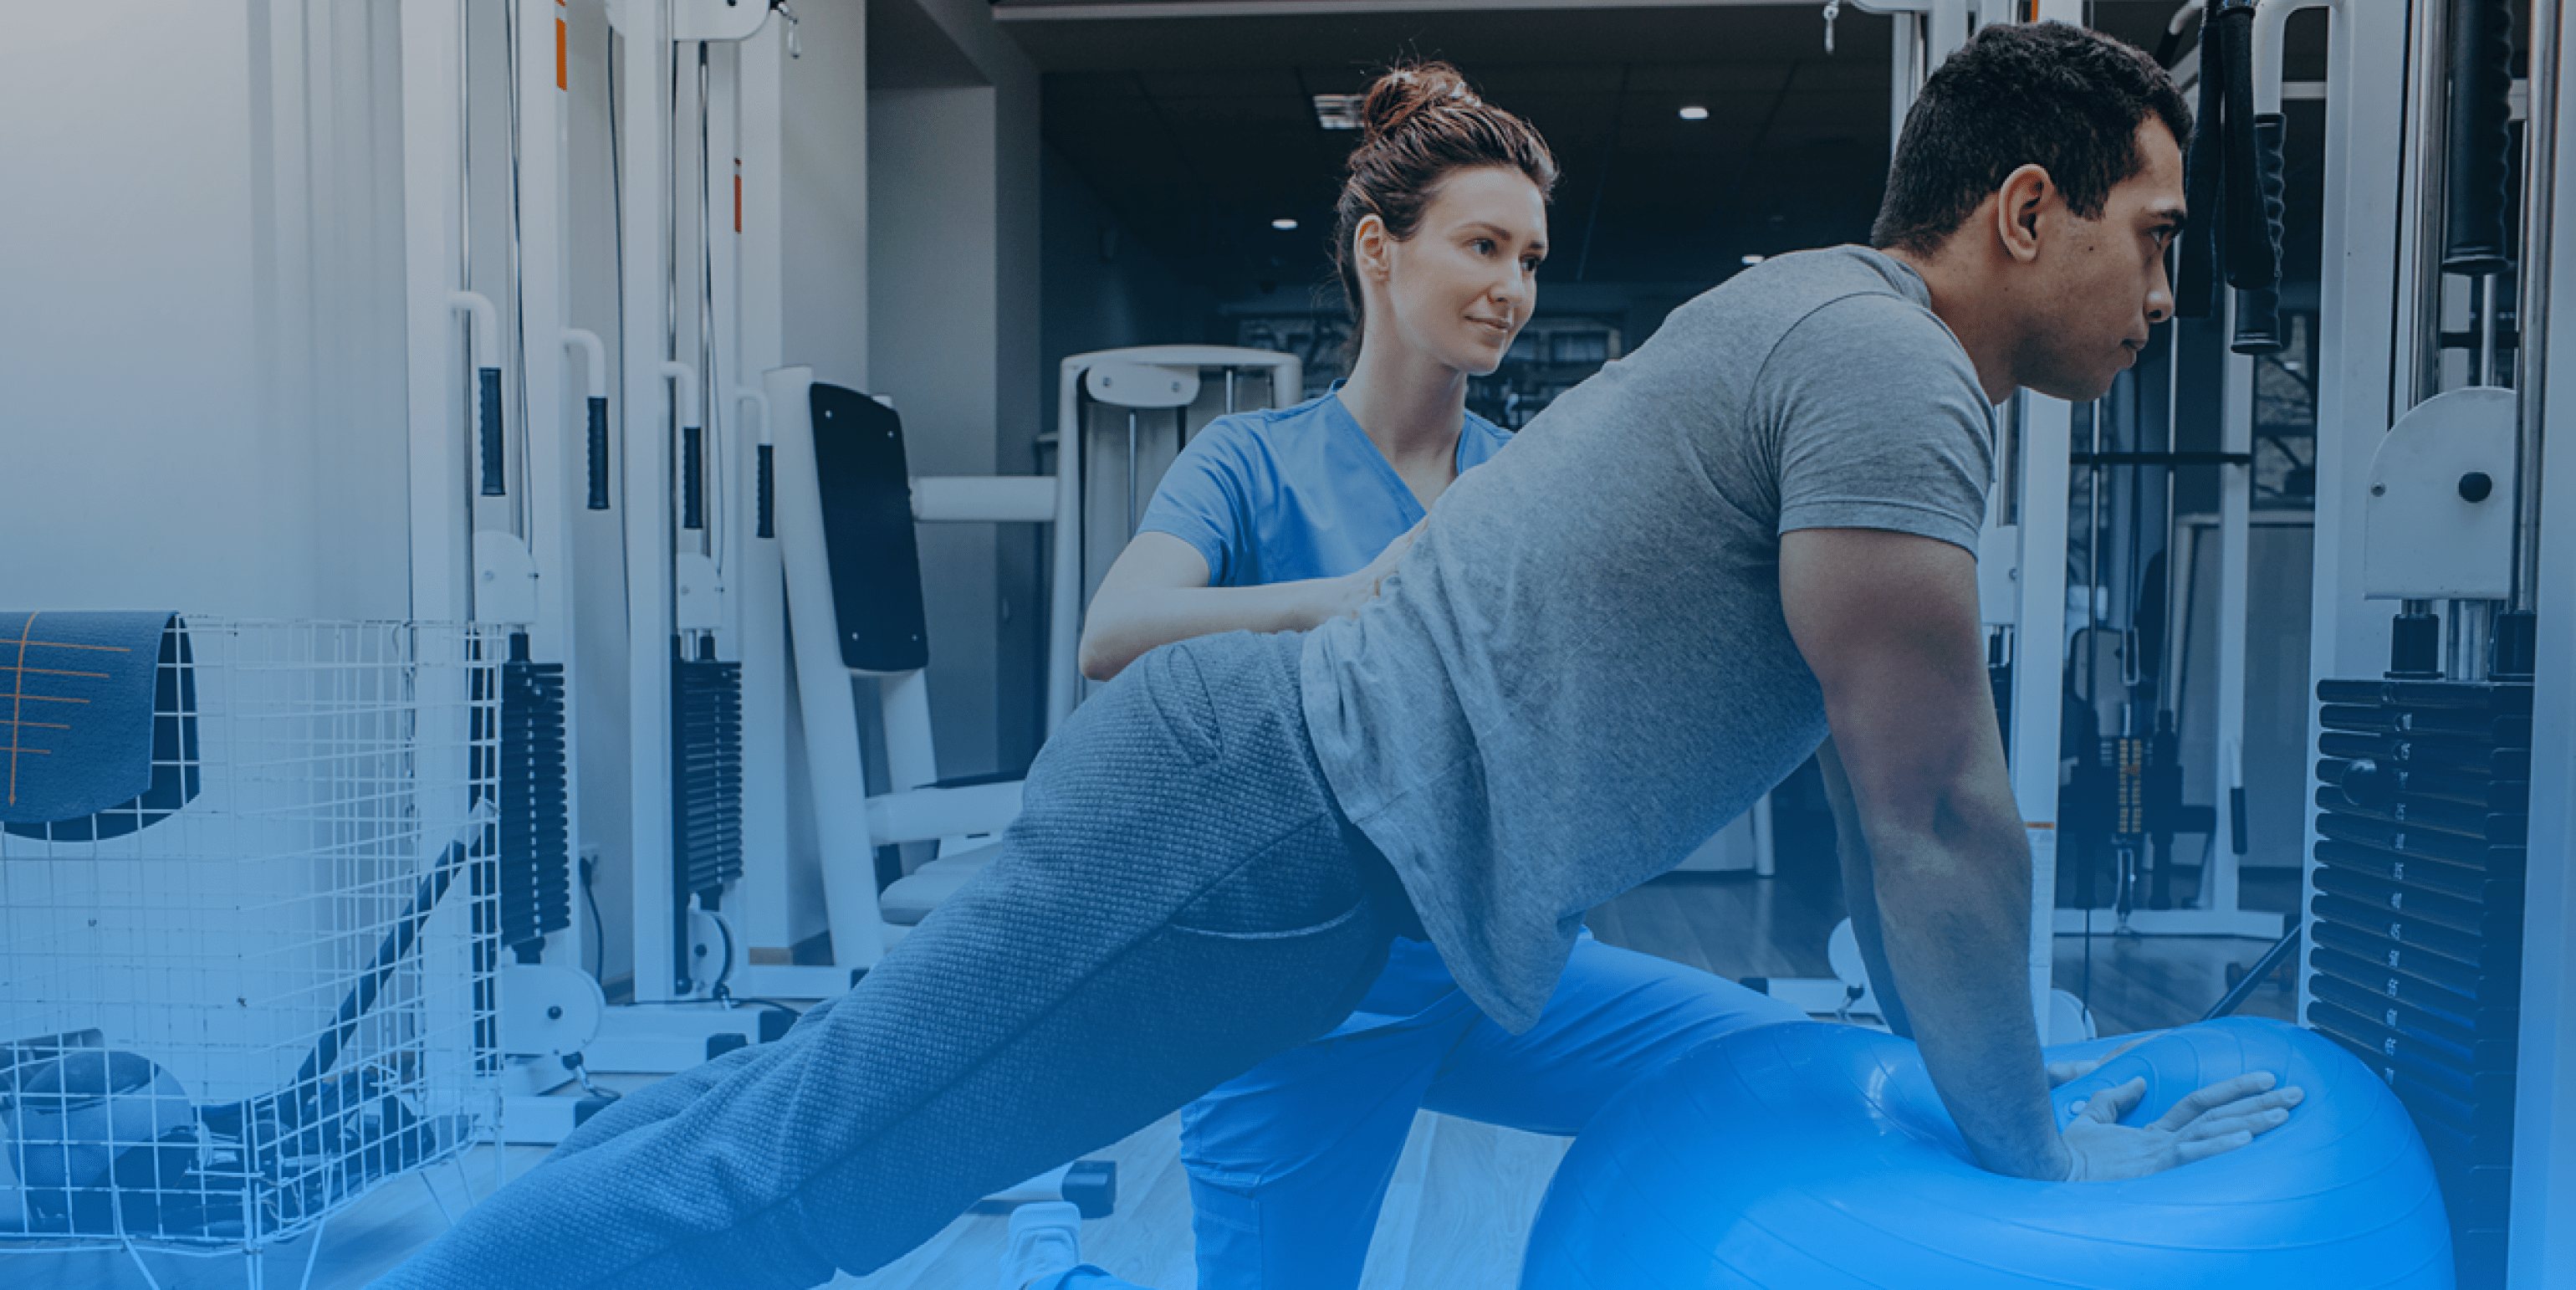 Why is Physical Therapy Pain Management Important?